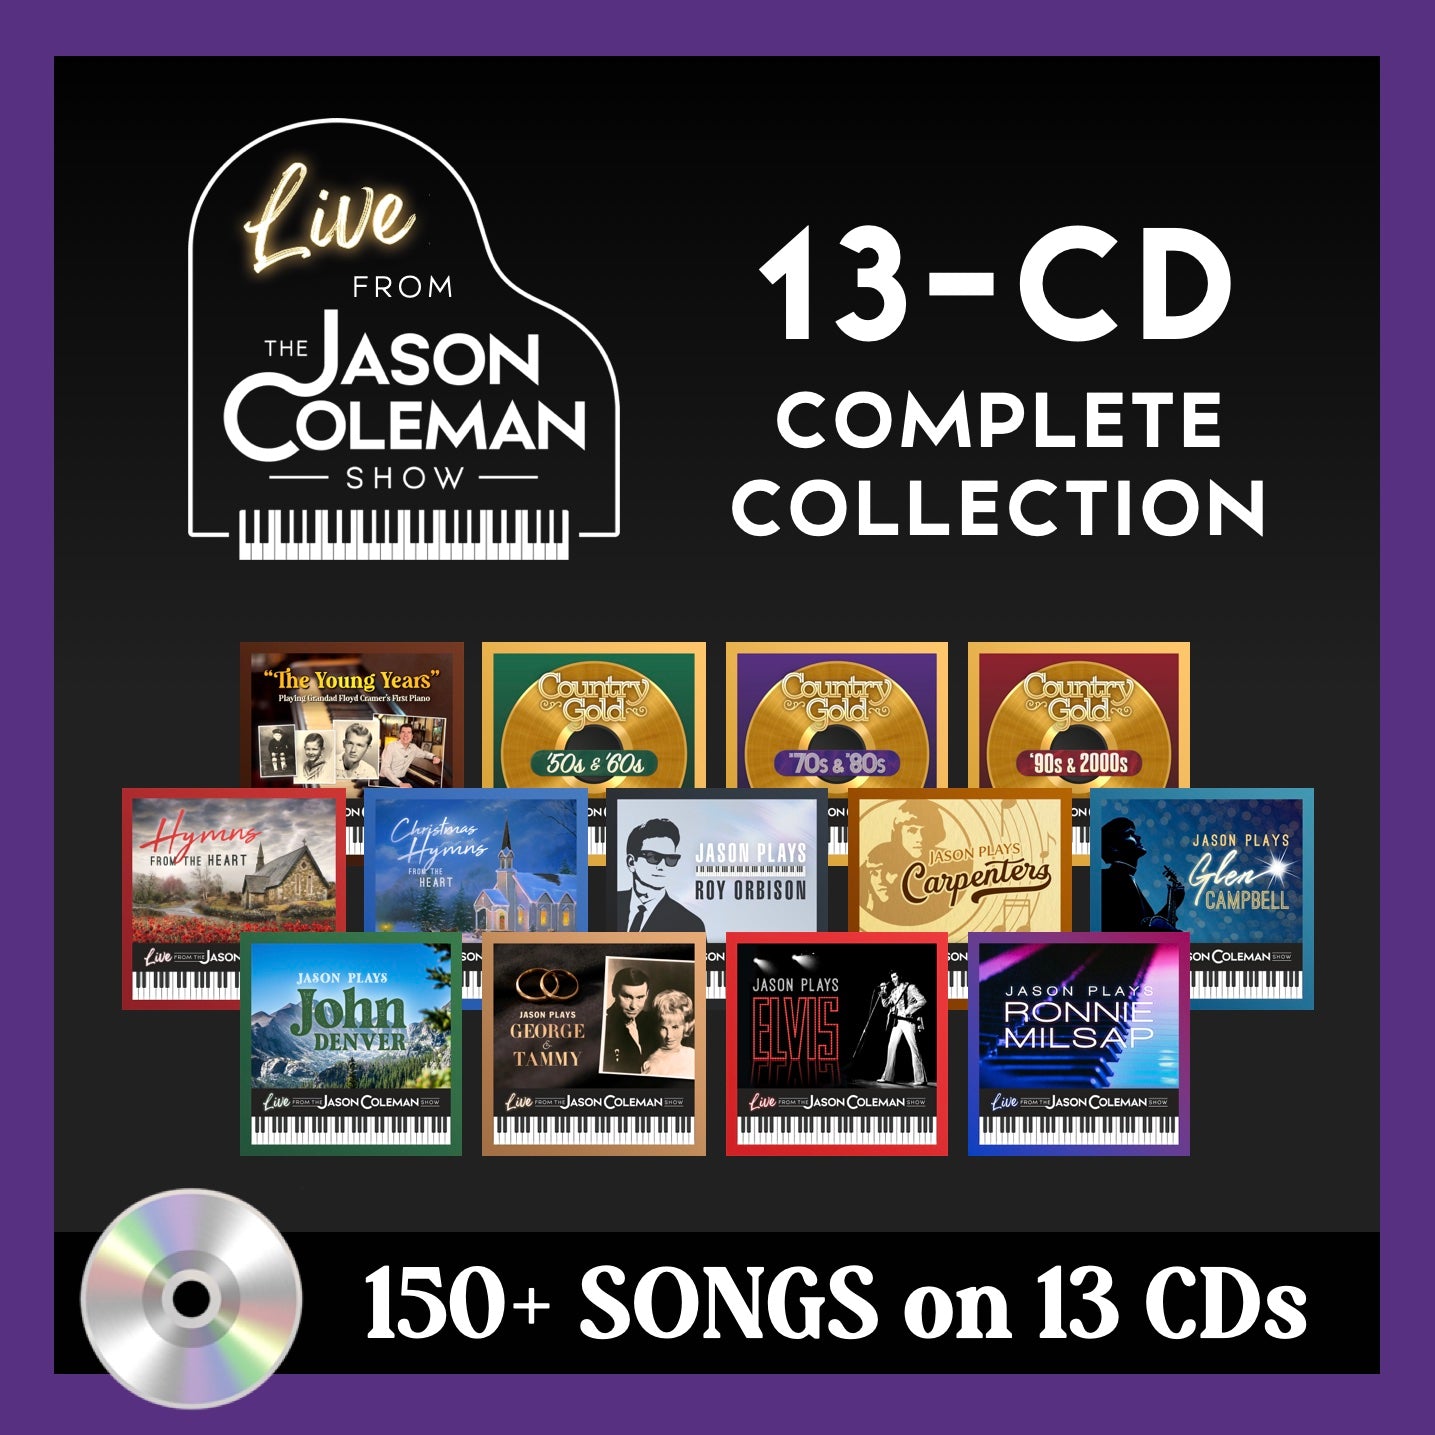 Live from The Jason Coleman Show 13-CD Complete Collection (Get 4 CDs FREE!)